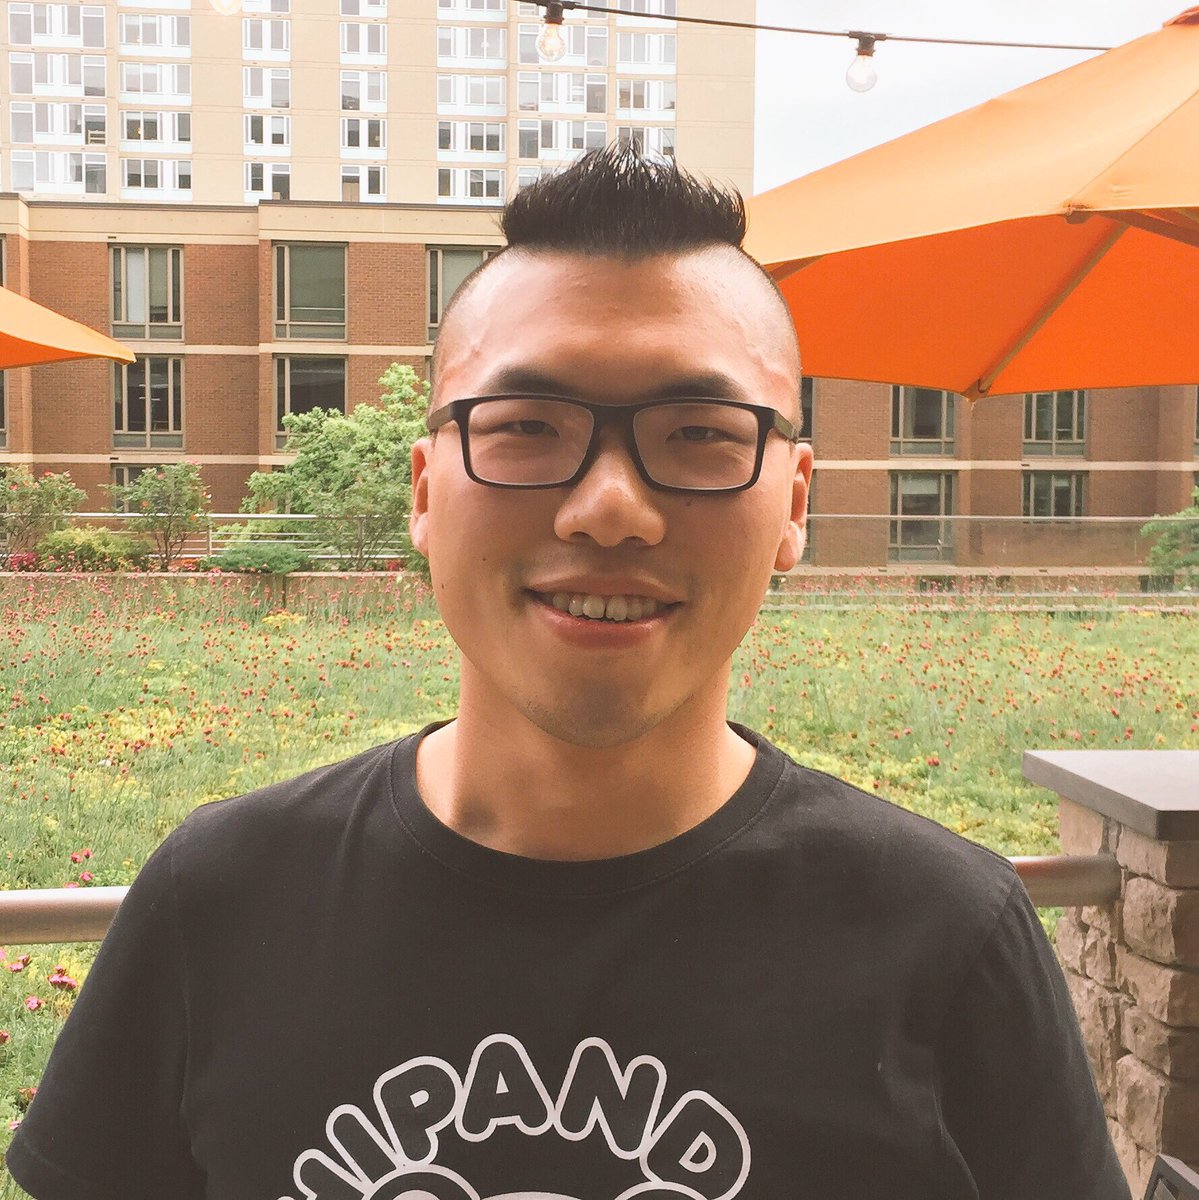 We welcome Linyang Ju as a new PhD student in our lab!